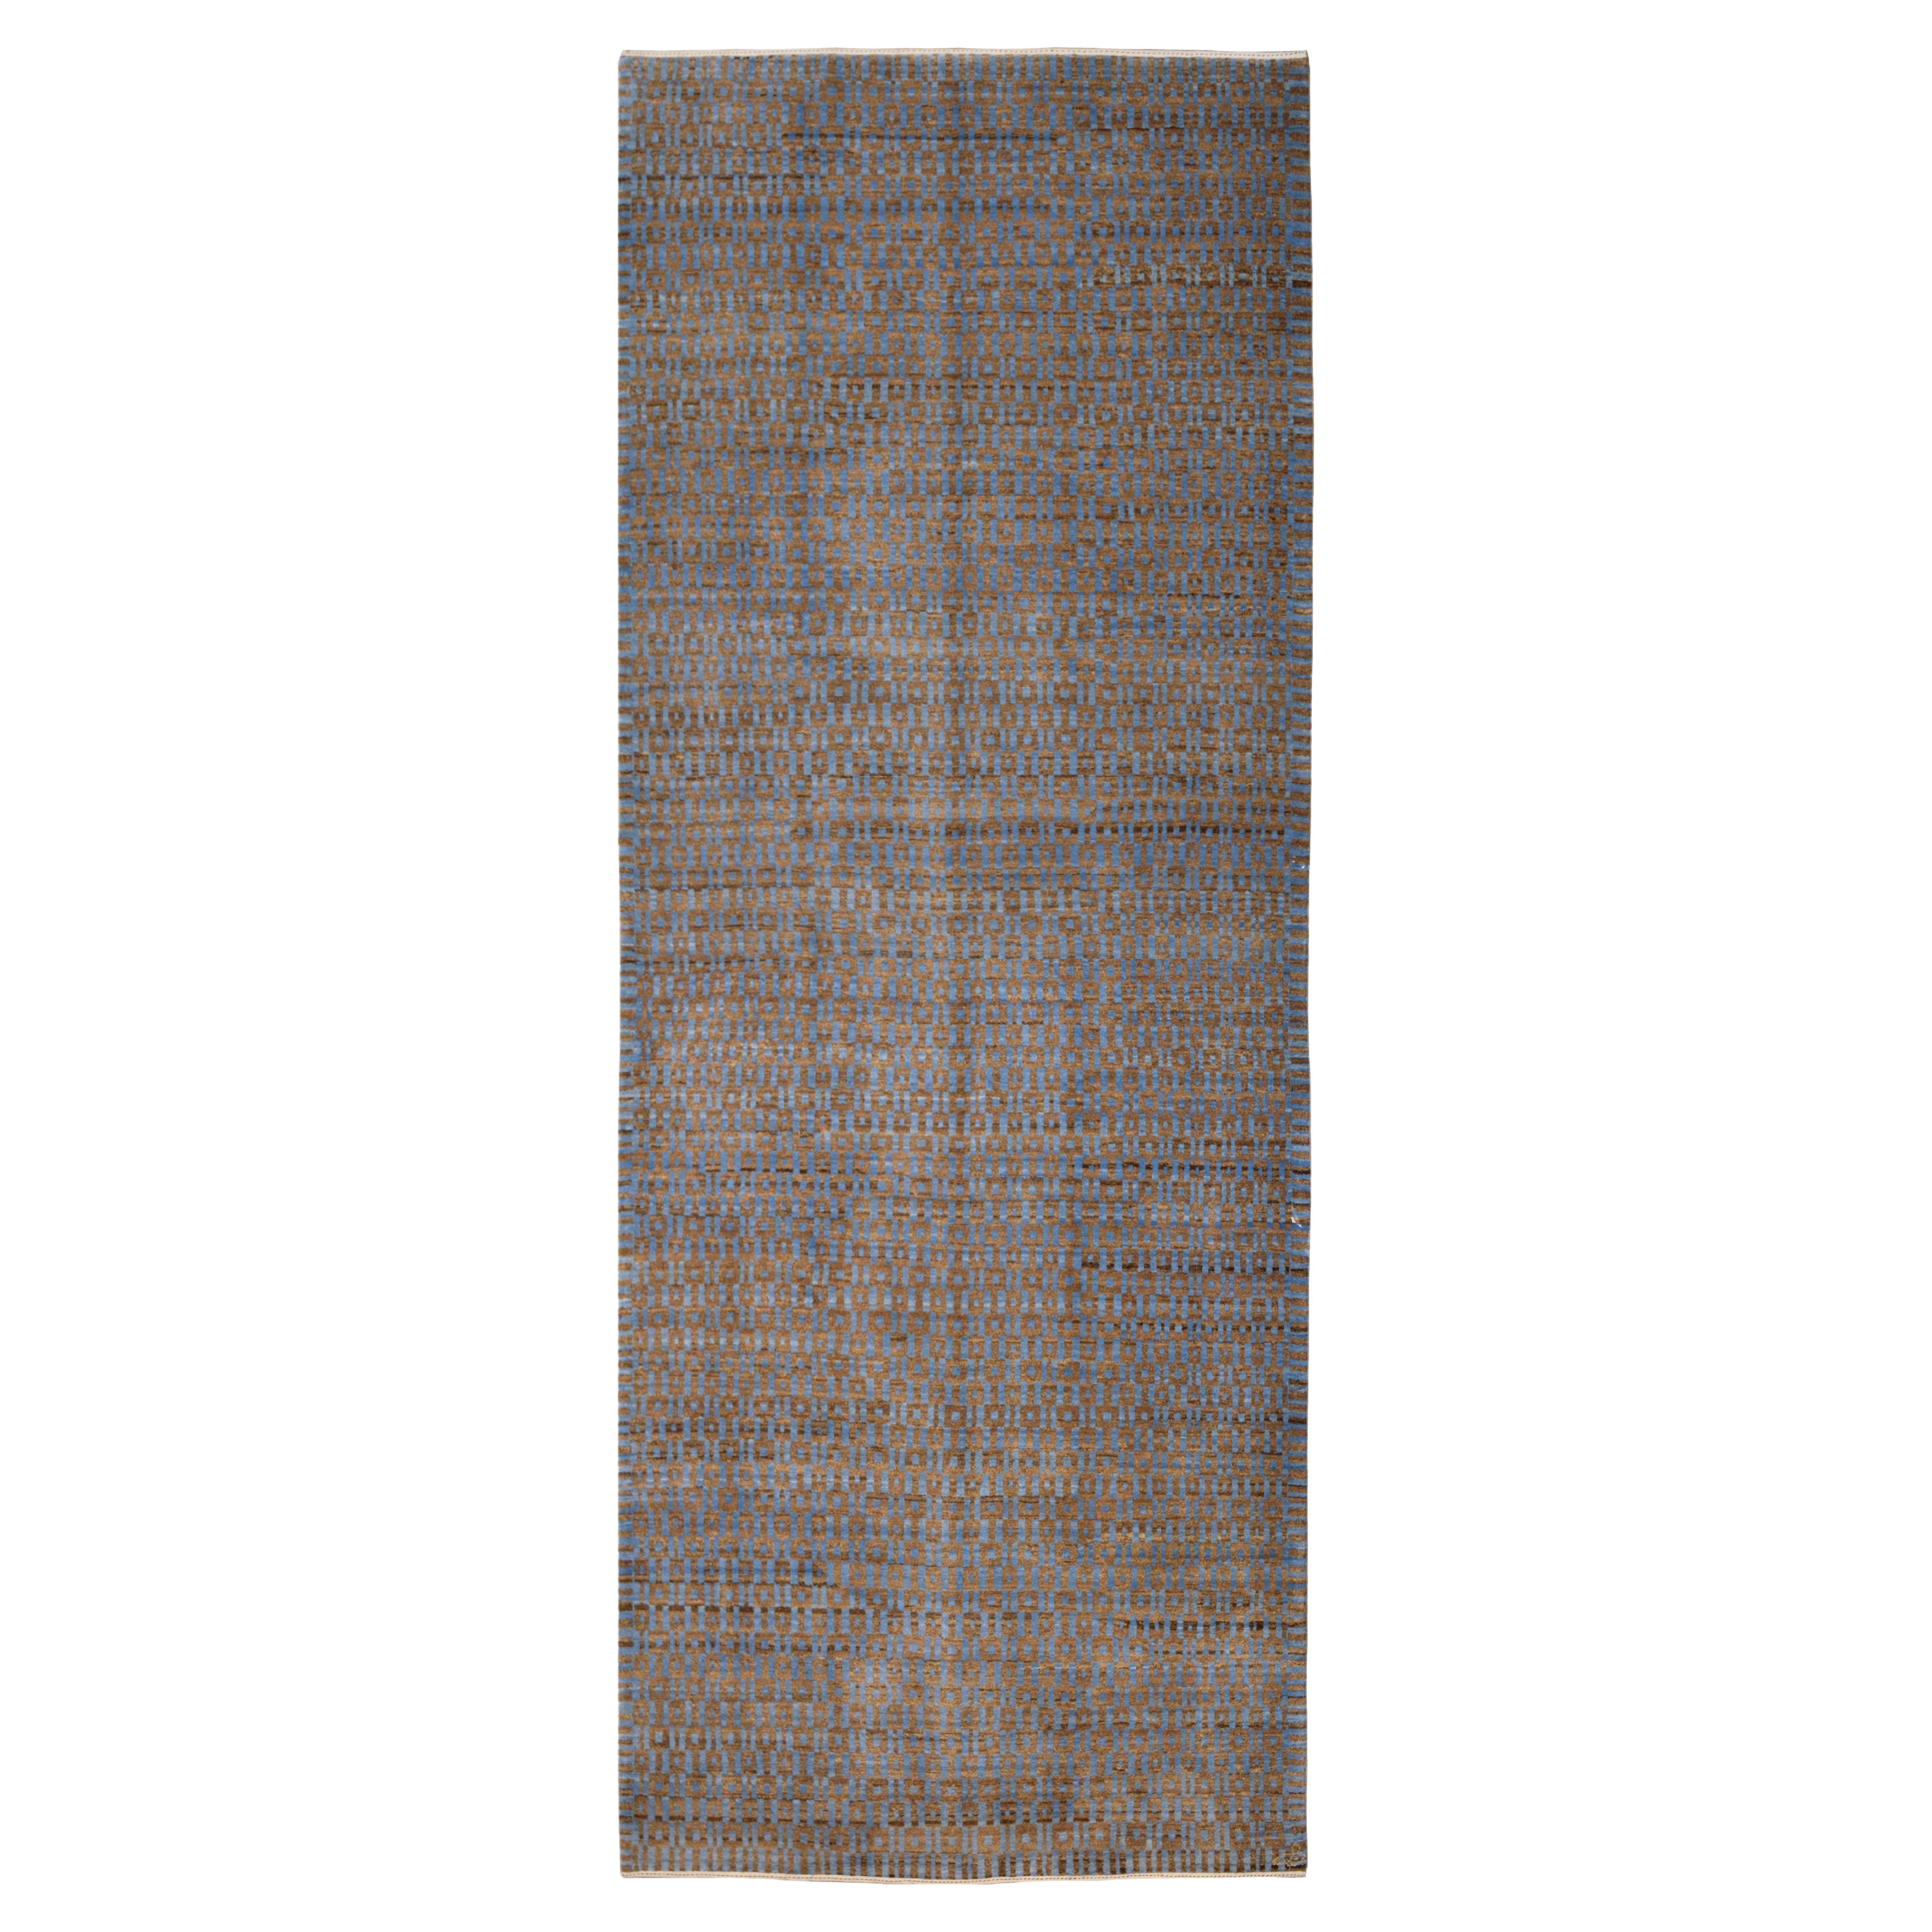 Orley Shabahng, Hand-Knotted, Art Deco Wool Persian Carpet, Blue, Brown, 5'x 12'